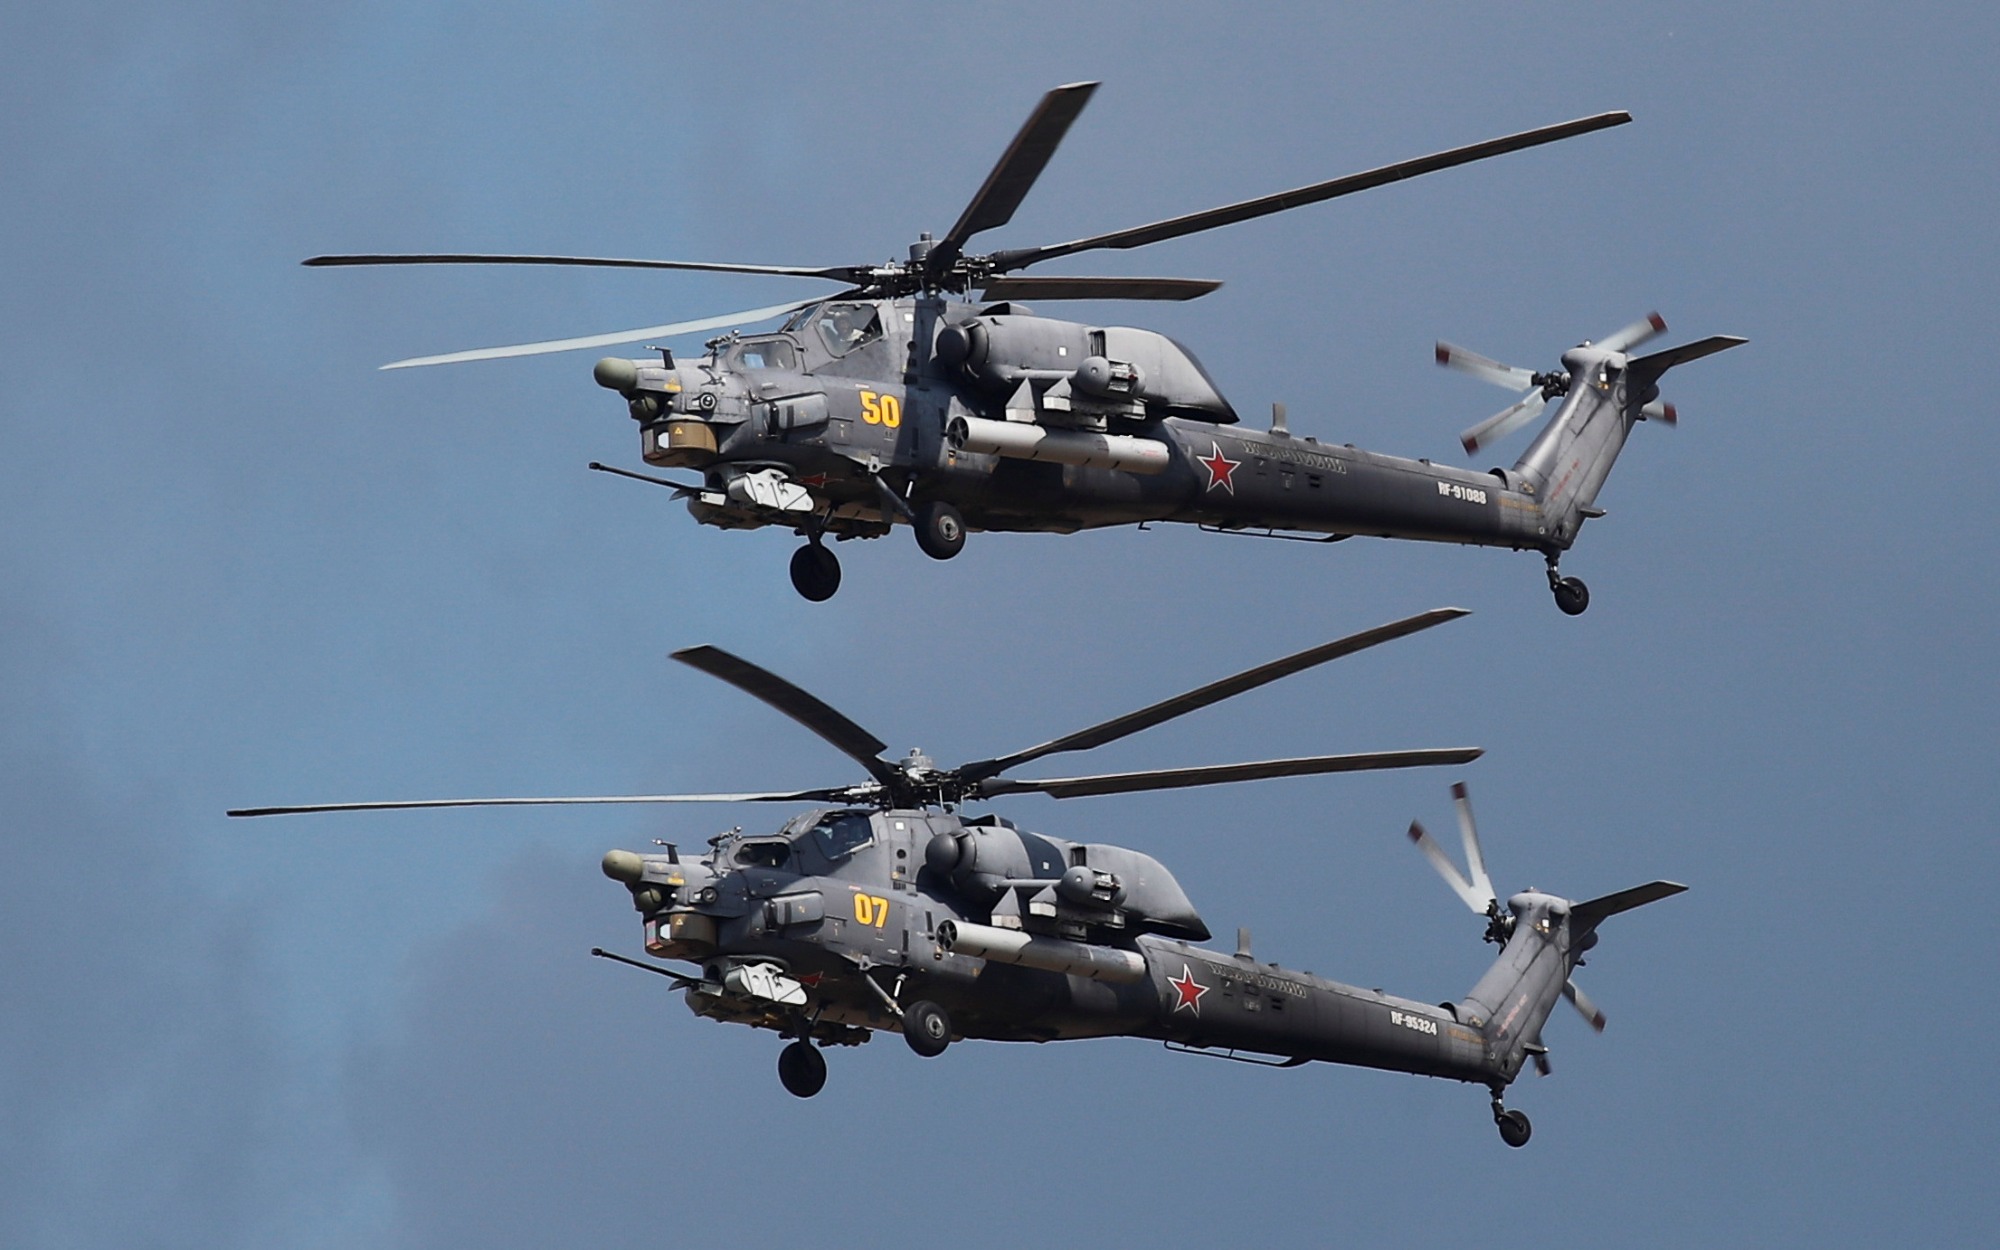 Russia's Mi-28NM Helicopter: The Apache's Worst Nightmare? | The National Interest